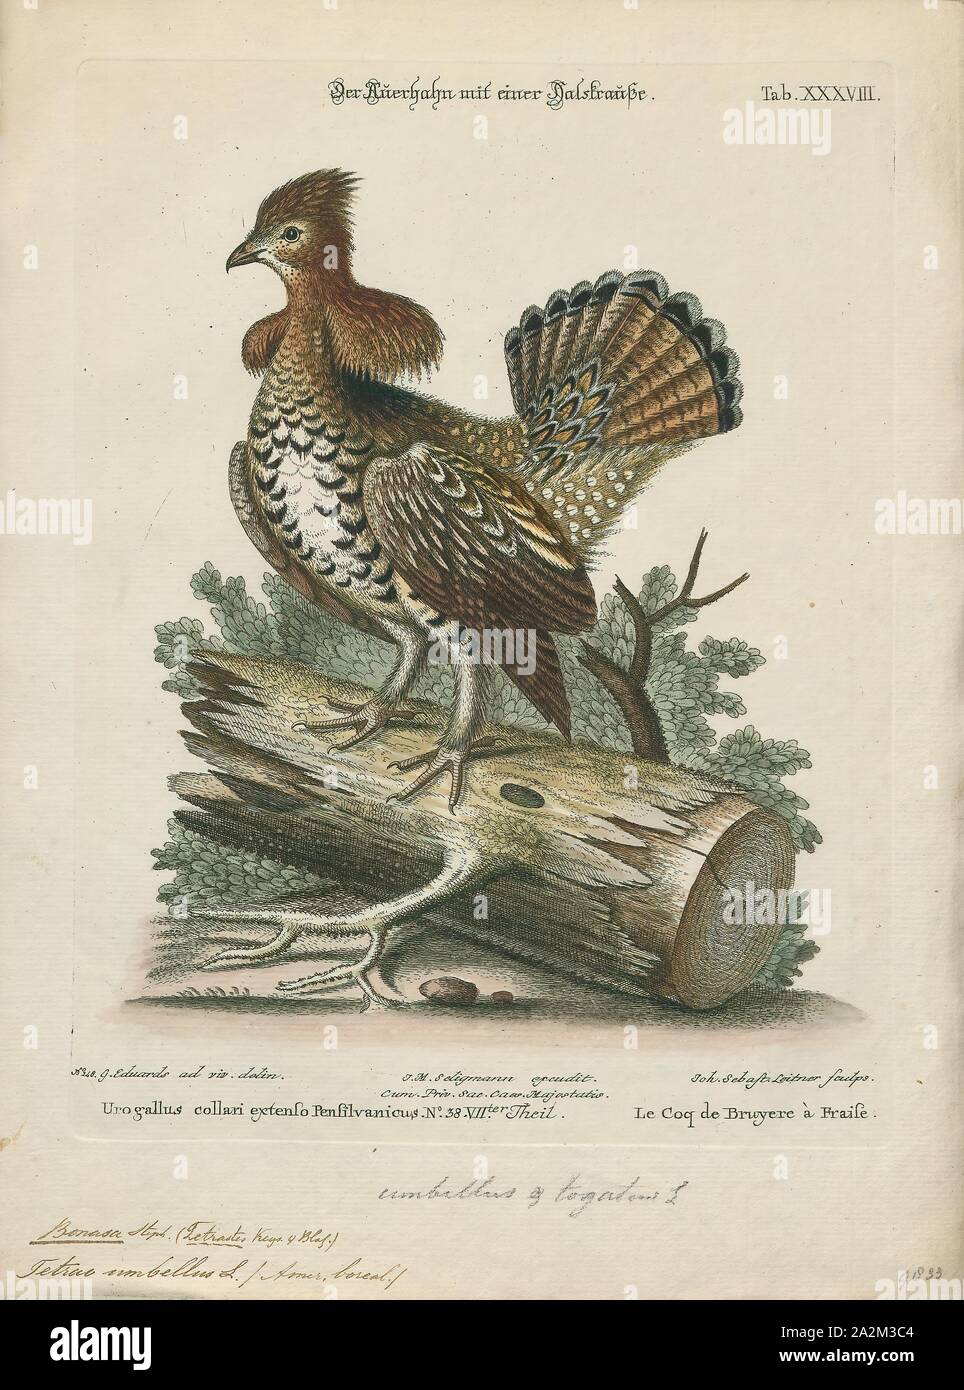 Bonasa umbellus, Print, The ruffed grouse (Bonasa umbellus) is a medium-sized grouse occurring in forests from the Appalachian Mountains across Canada to Alaska. It is non-migratory. It is the only species in the genus Bonasa., 1700-1880 Stock Photo